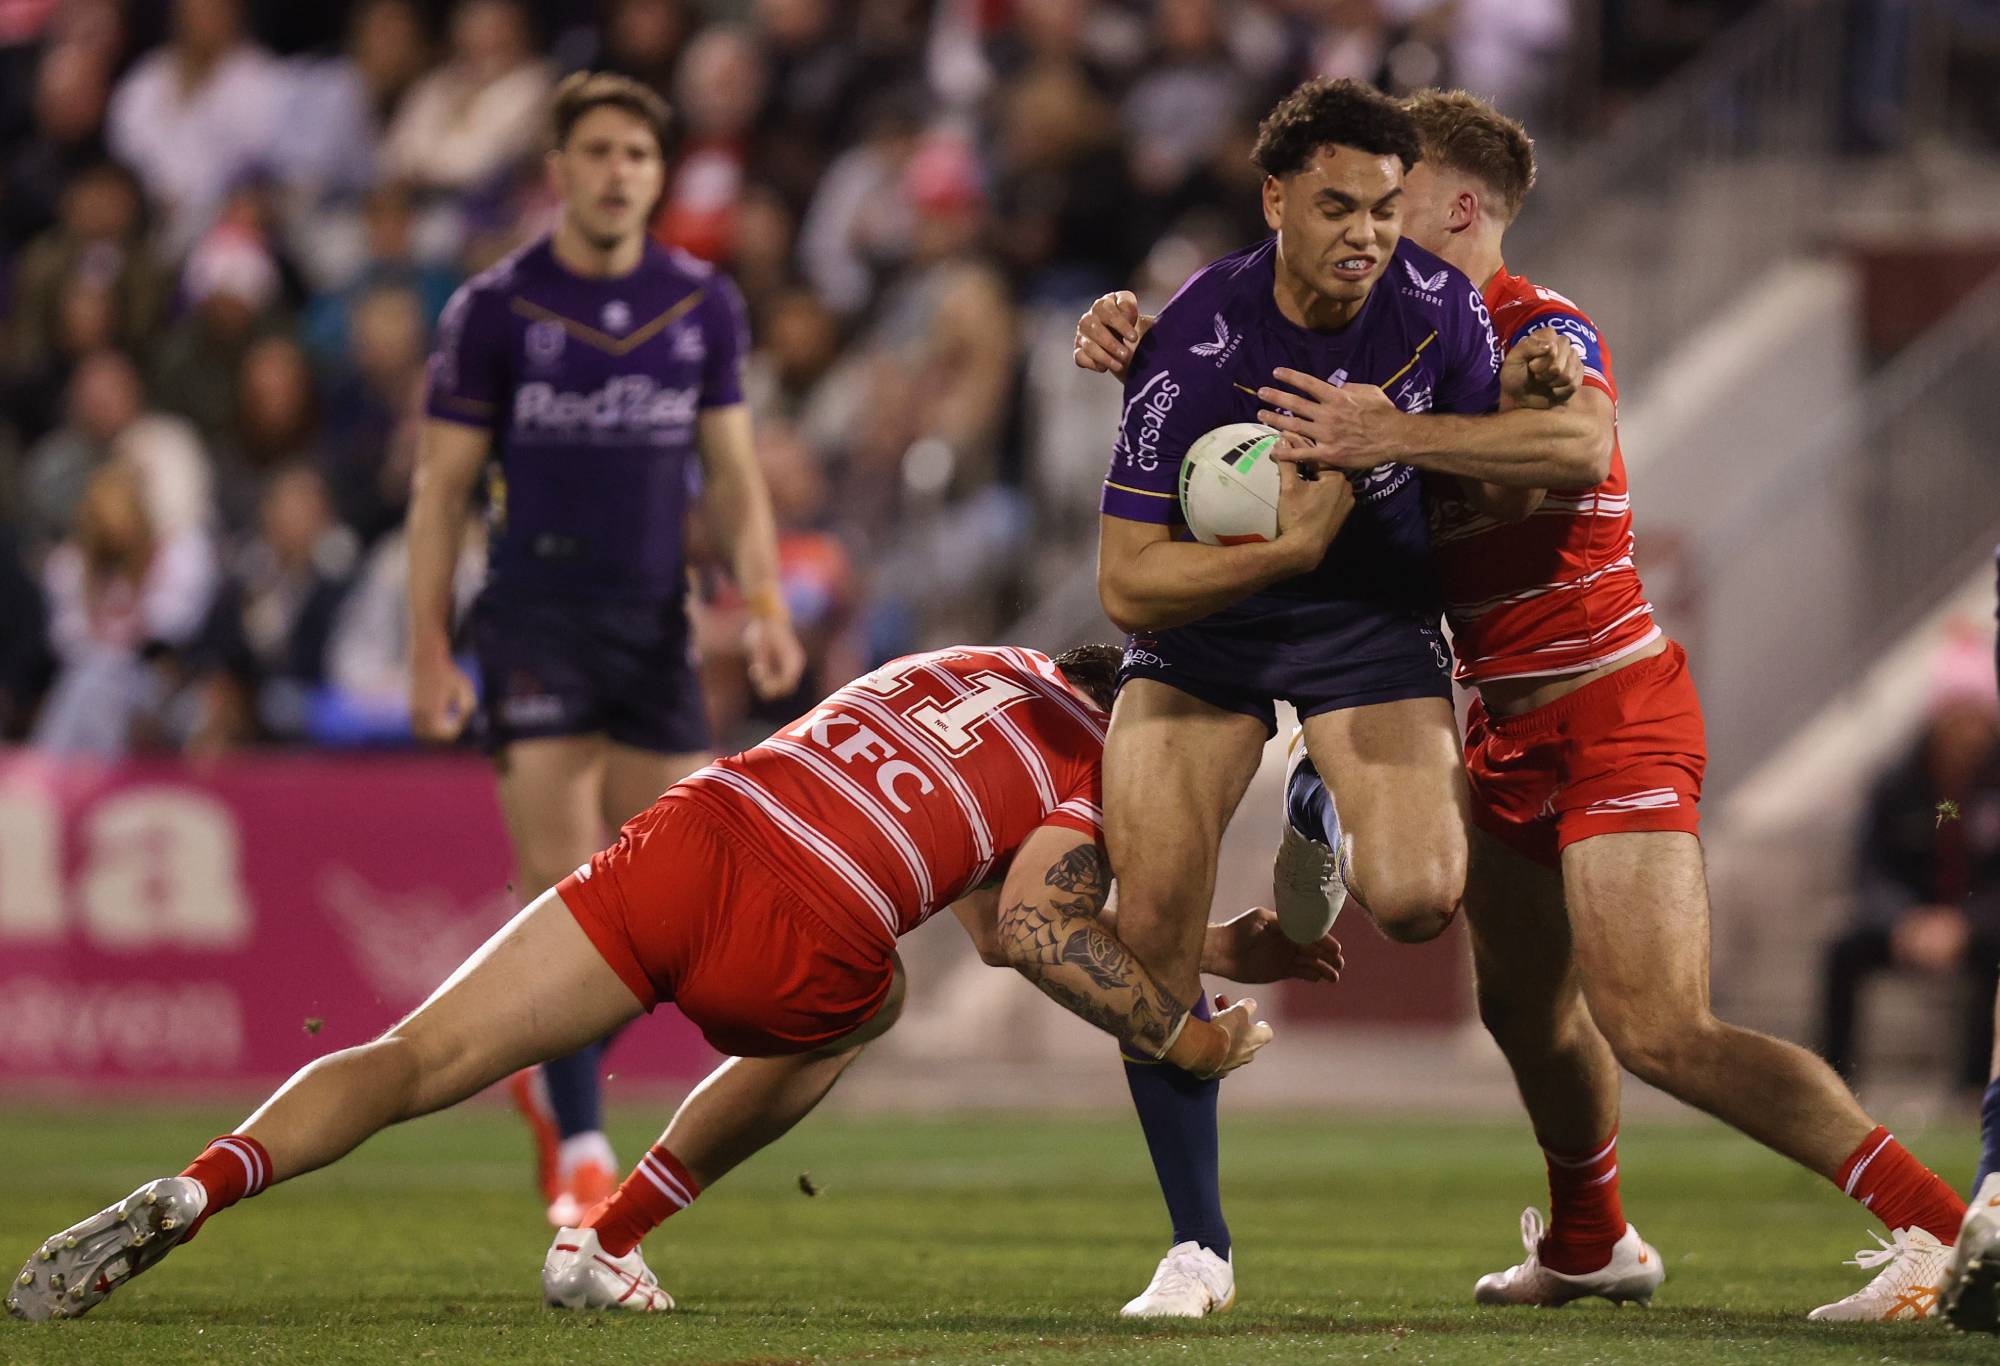 WOLLONGONG, AUSTRALIA - AUGUST 19: Xavier Coates of the Melbourne Storm breaks out of a tackle before scoring a try during the round 25 NRL match between St George Illawarra Dragons and Melbourne Storm at WIN Stadium on August 19, 2023 in Wollongong, Australia. (Photo by Tim Allsop/Getty Images)